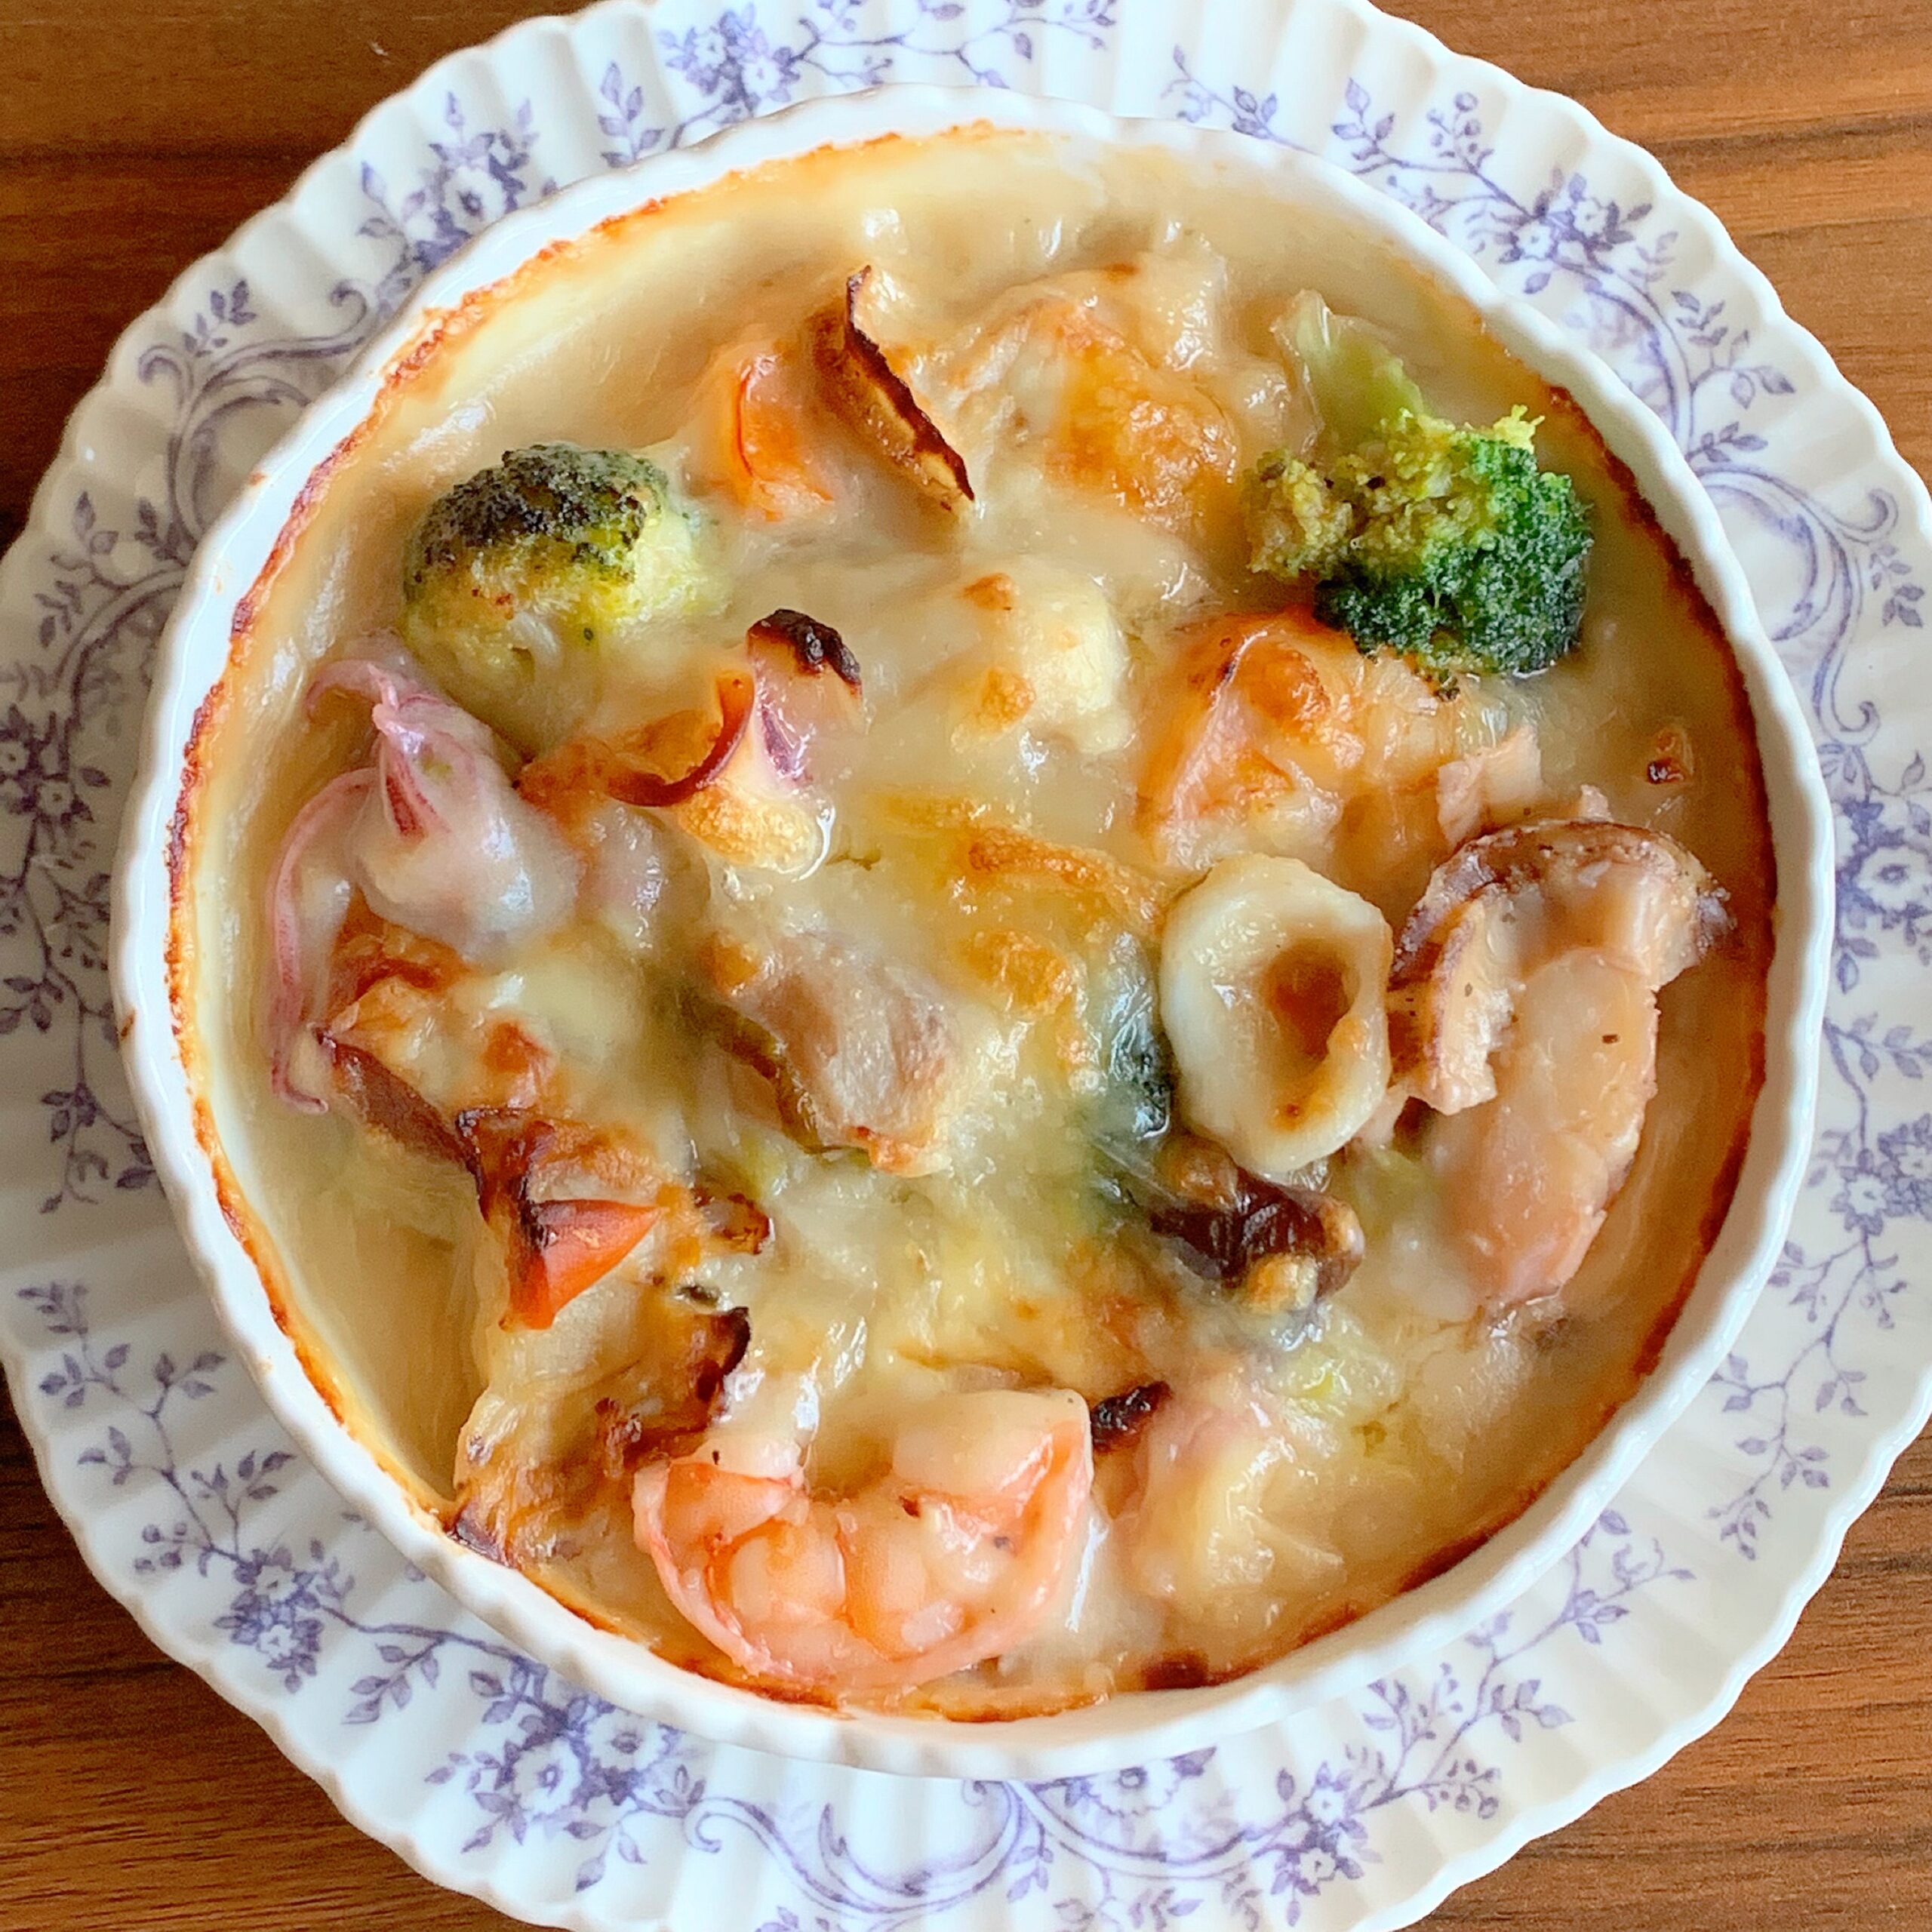 Gratin of winter vegetables and seafood